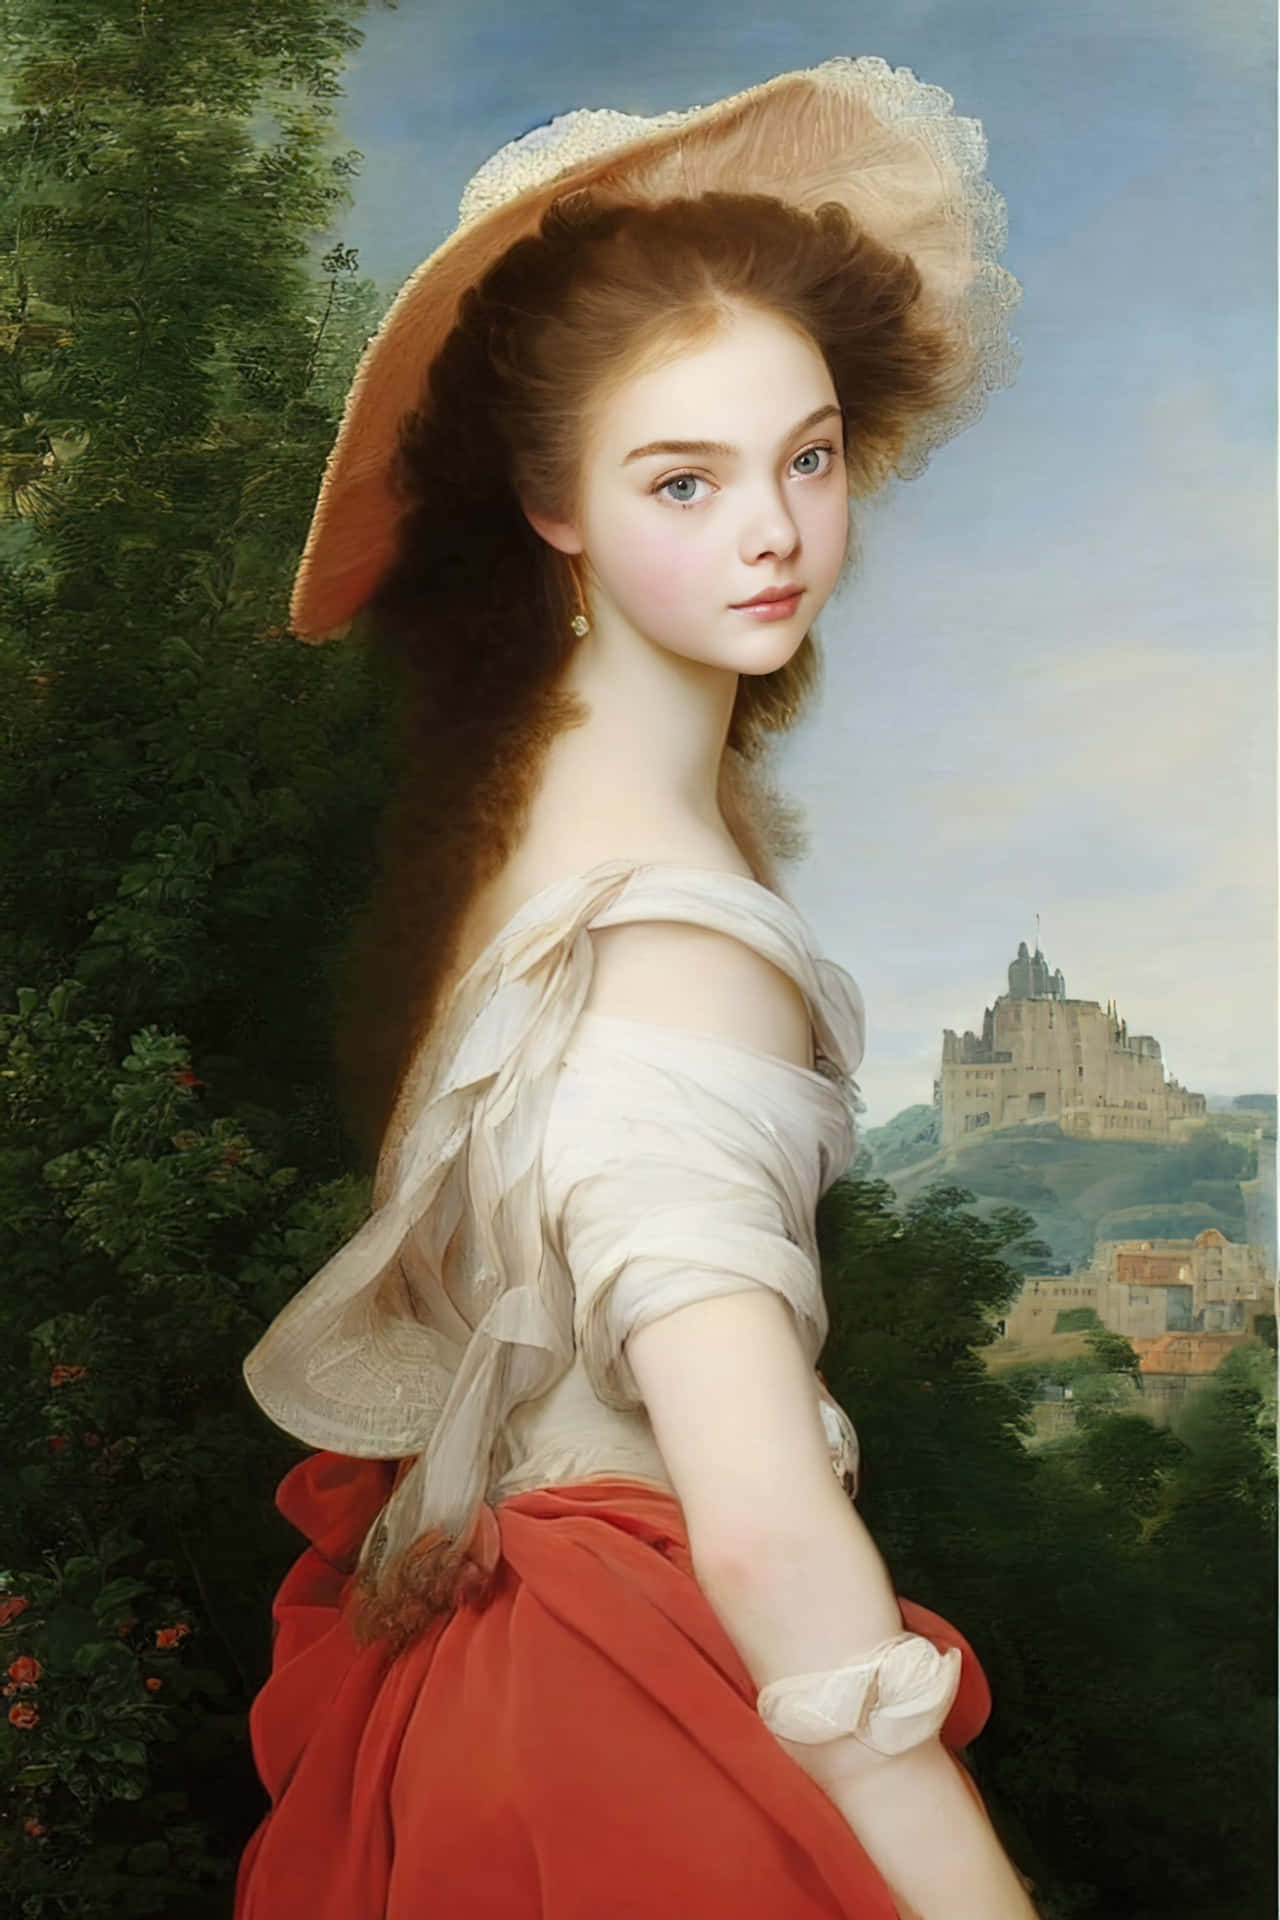 A Painting Of A Woman In A Red Dress